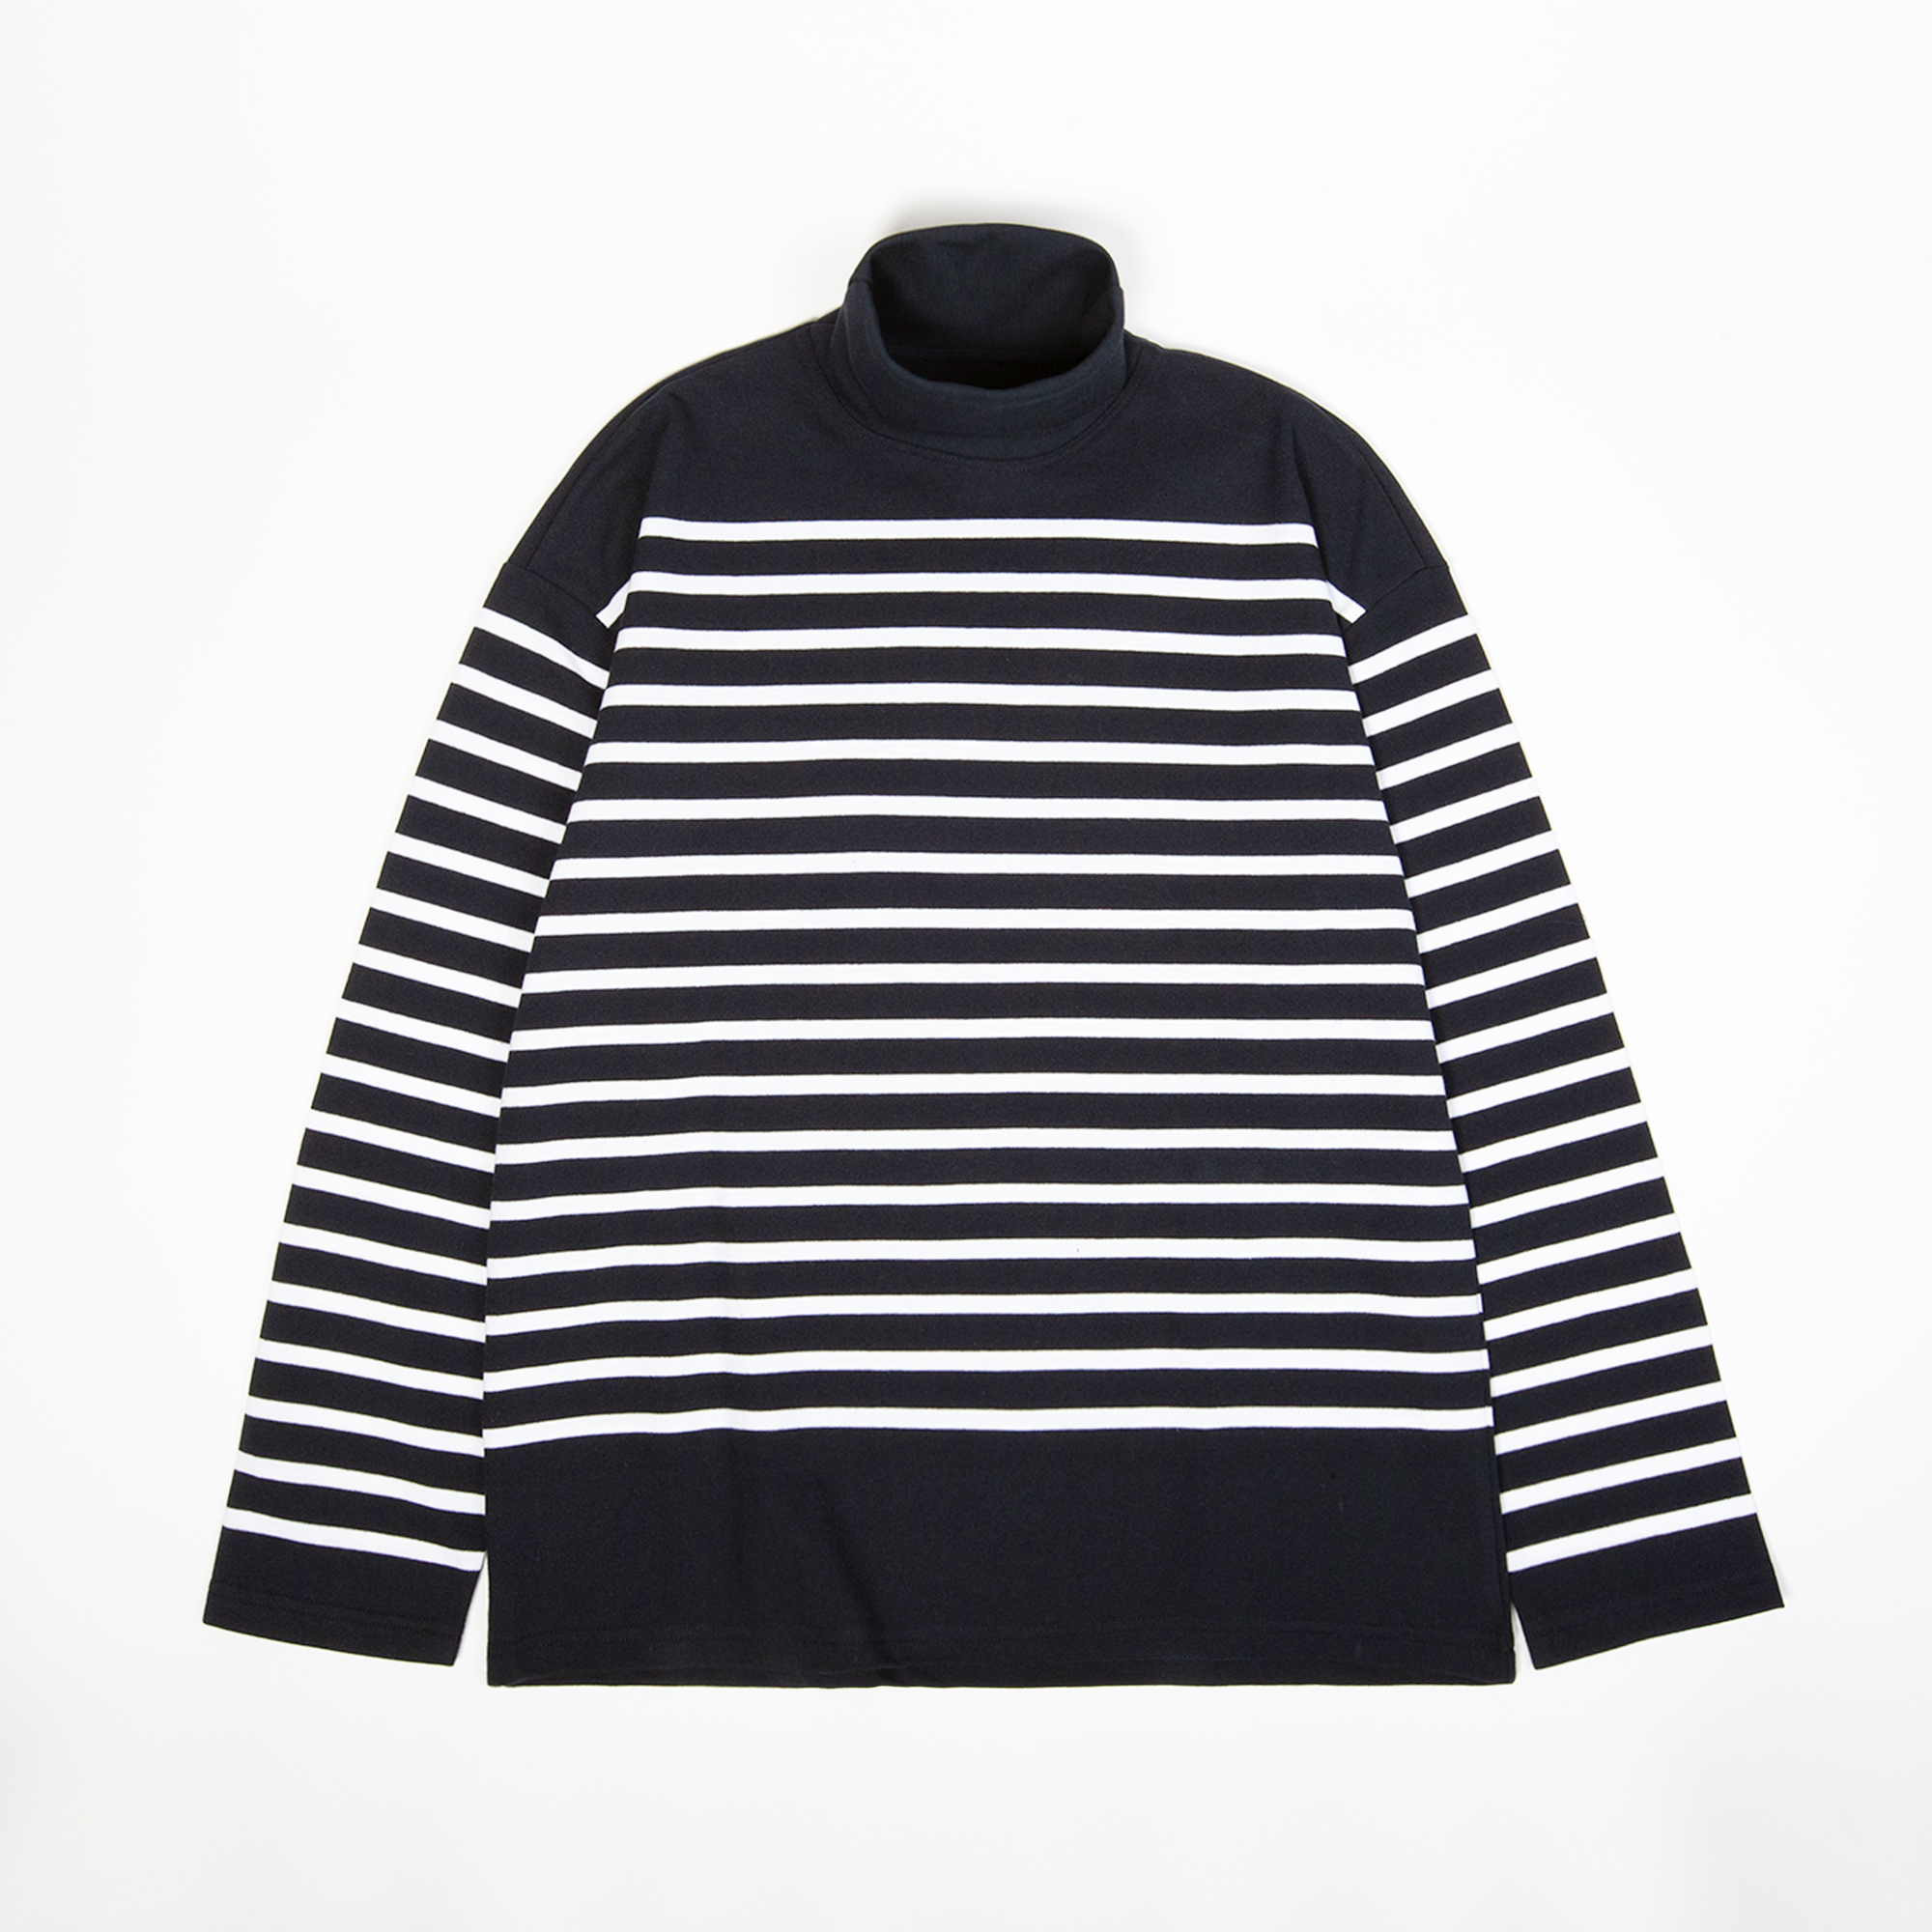 ORLO t-shirt in Midnight White stripes color by Arpenteur